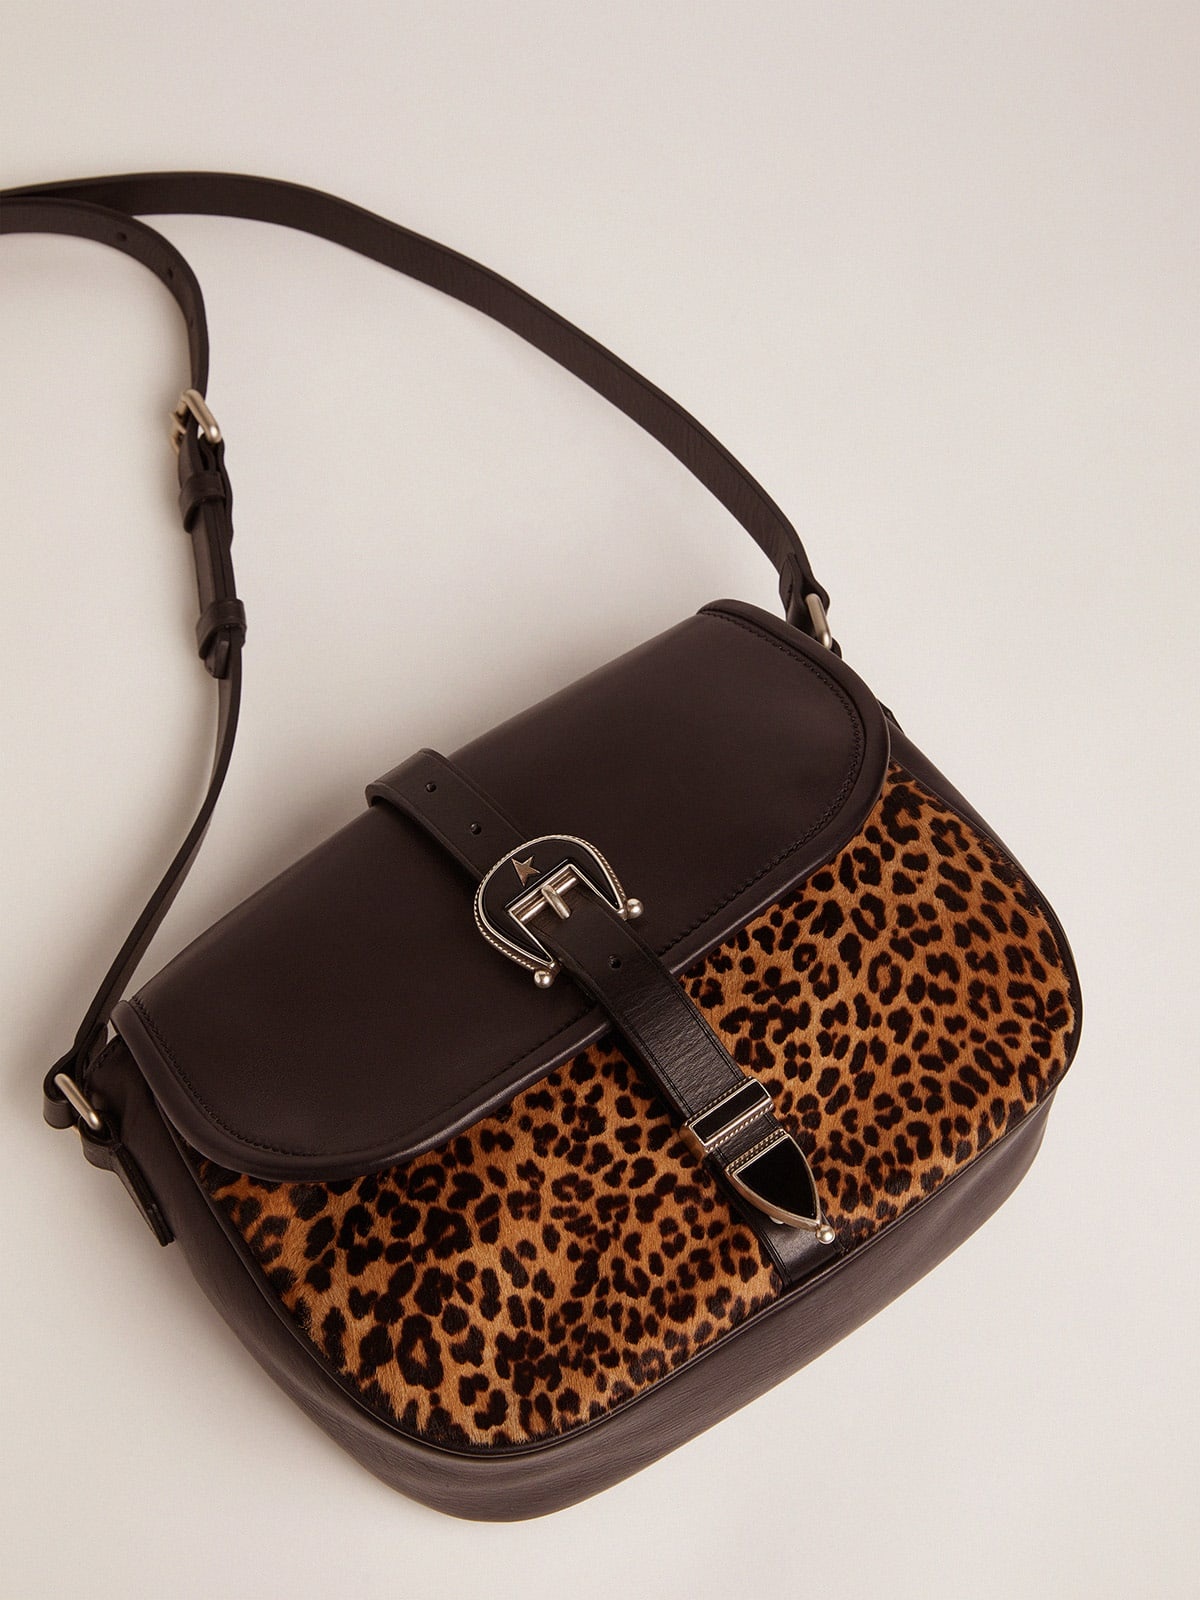 Medium Rodeo Bag in black leather and leopard-print pony skin - 4